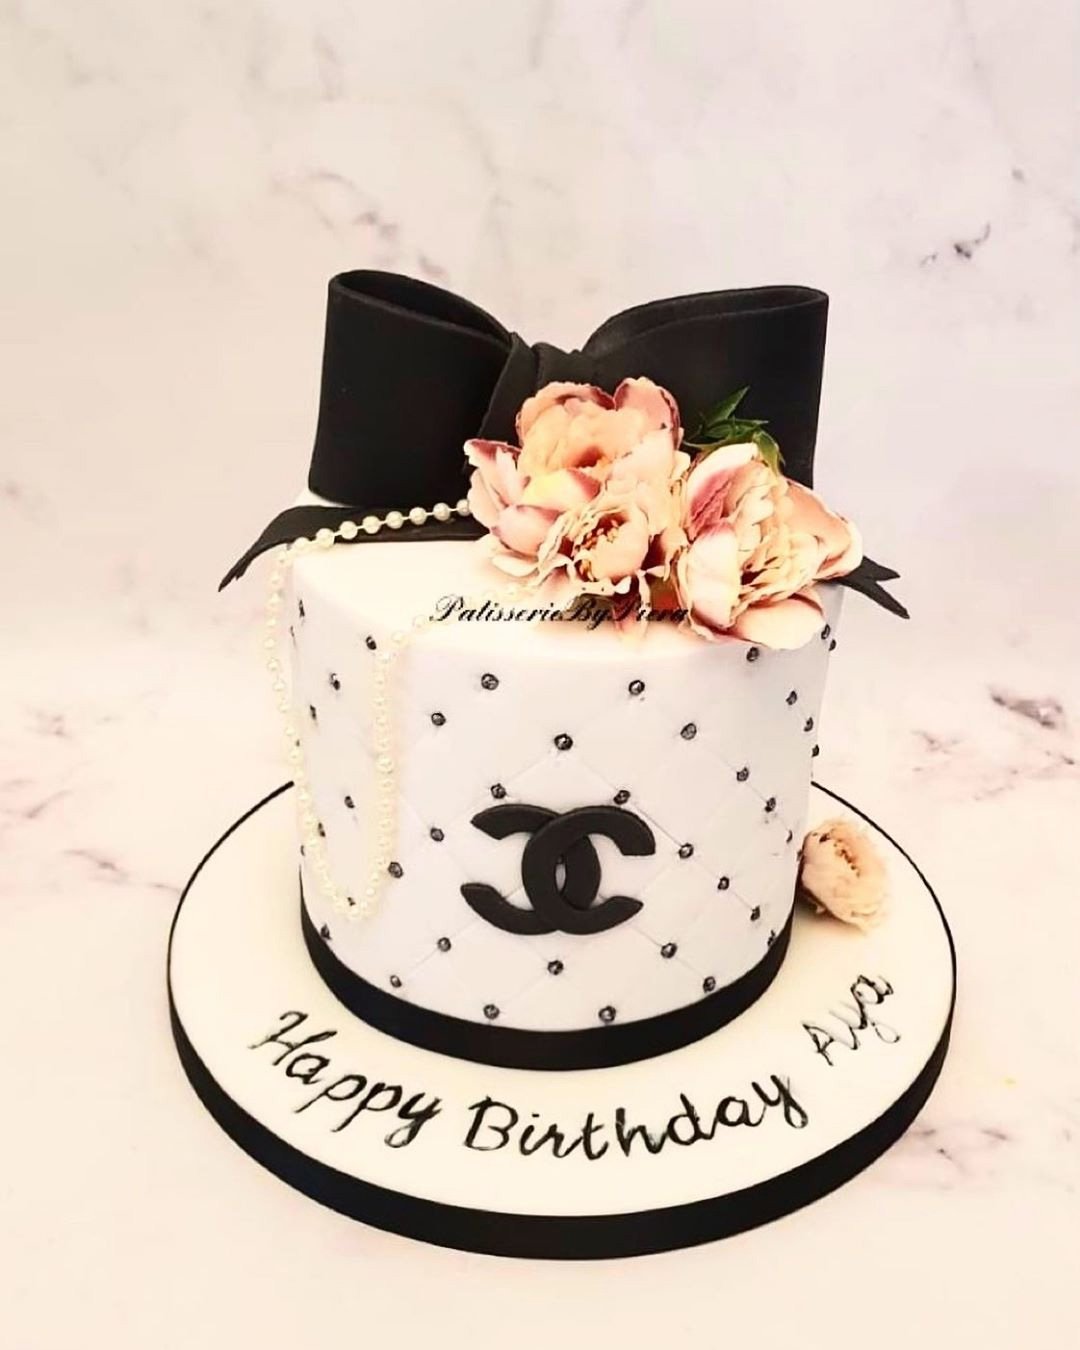 Buy Online Chanel Fashion Birthday Cake  Order Now  Online Cake Delivery   The French Cake Company